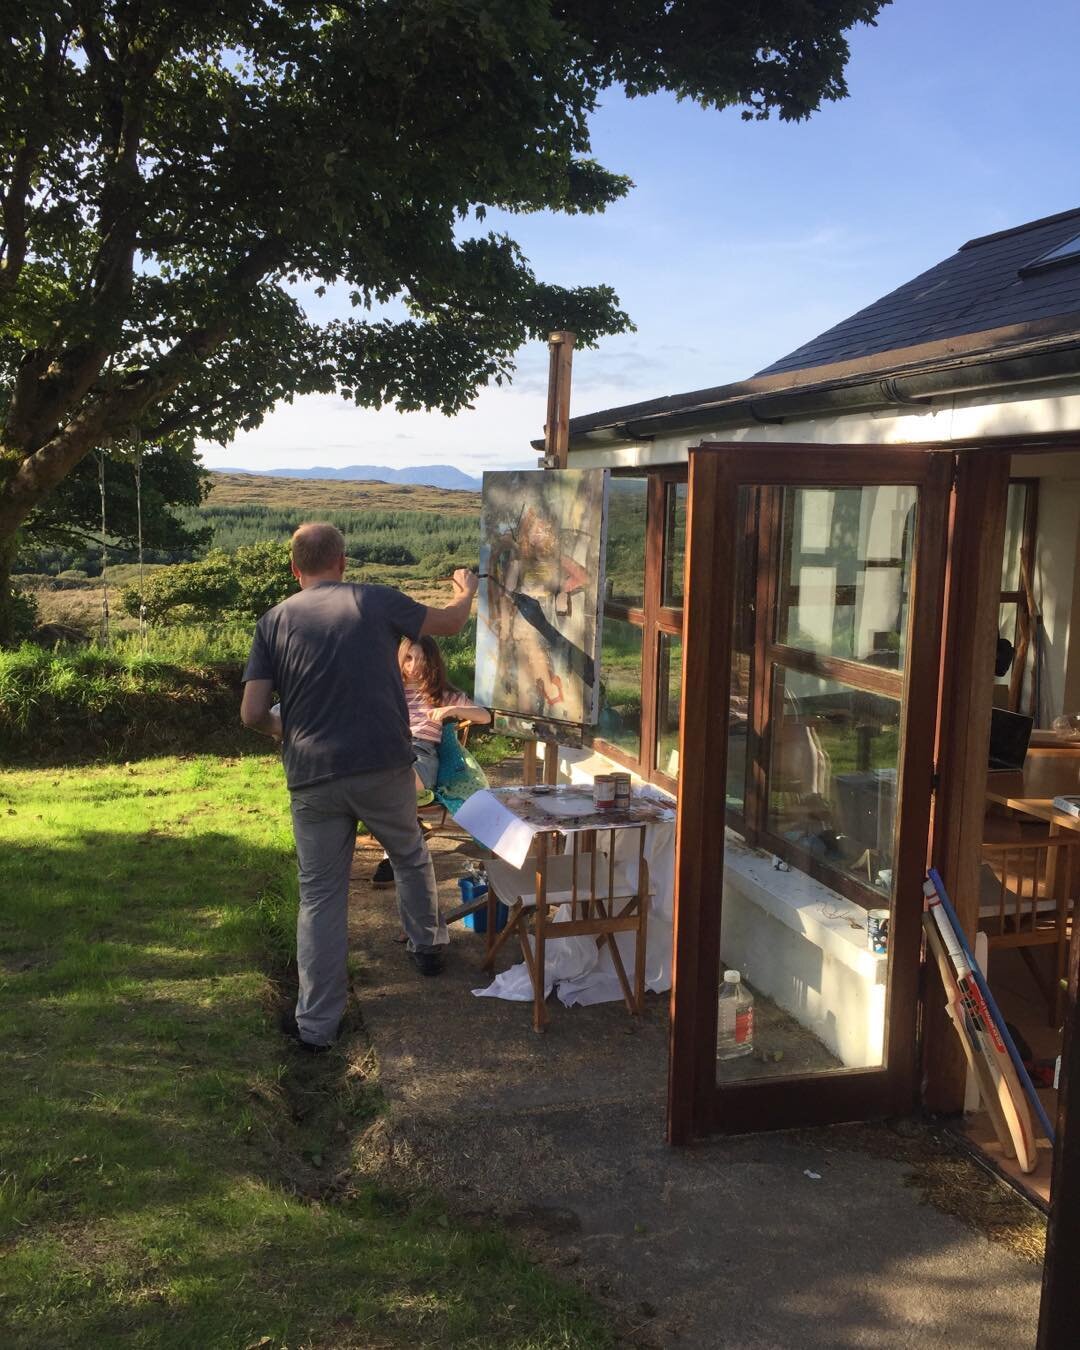 The brilliant artist Grant Wells earning his dinner capturing our first born in the perfect West Cork light #artistinresidence #grantwells #portrait #light #ireland #summer18 #painting #daughter